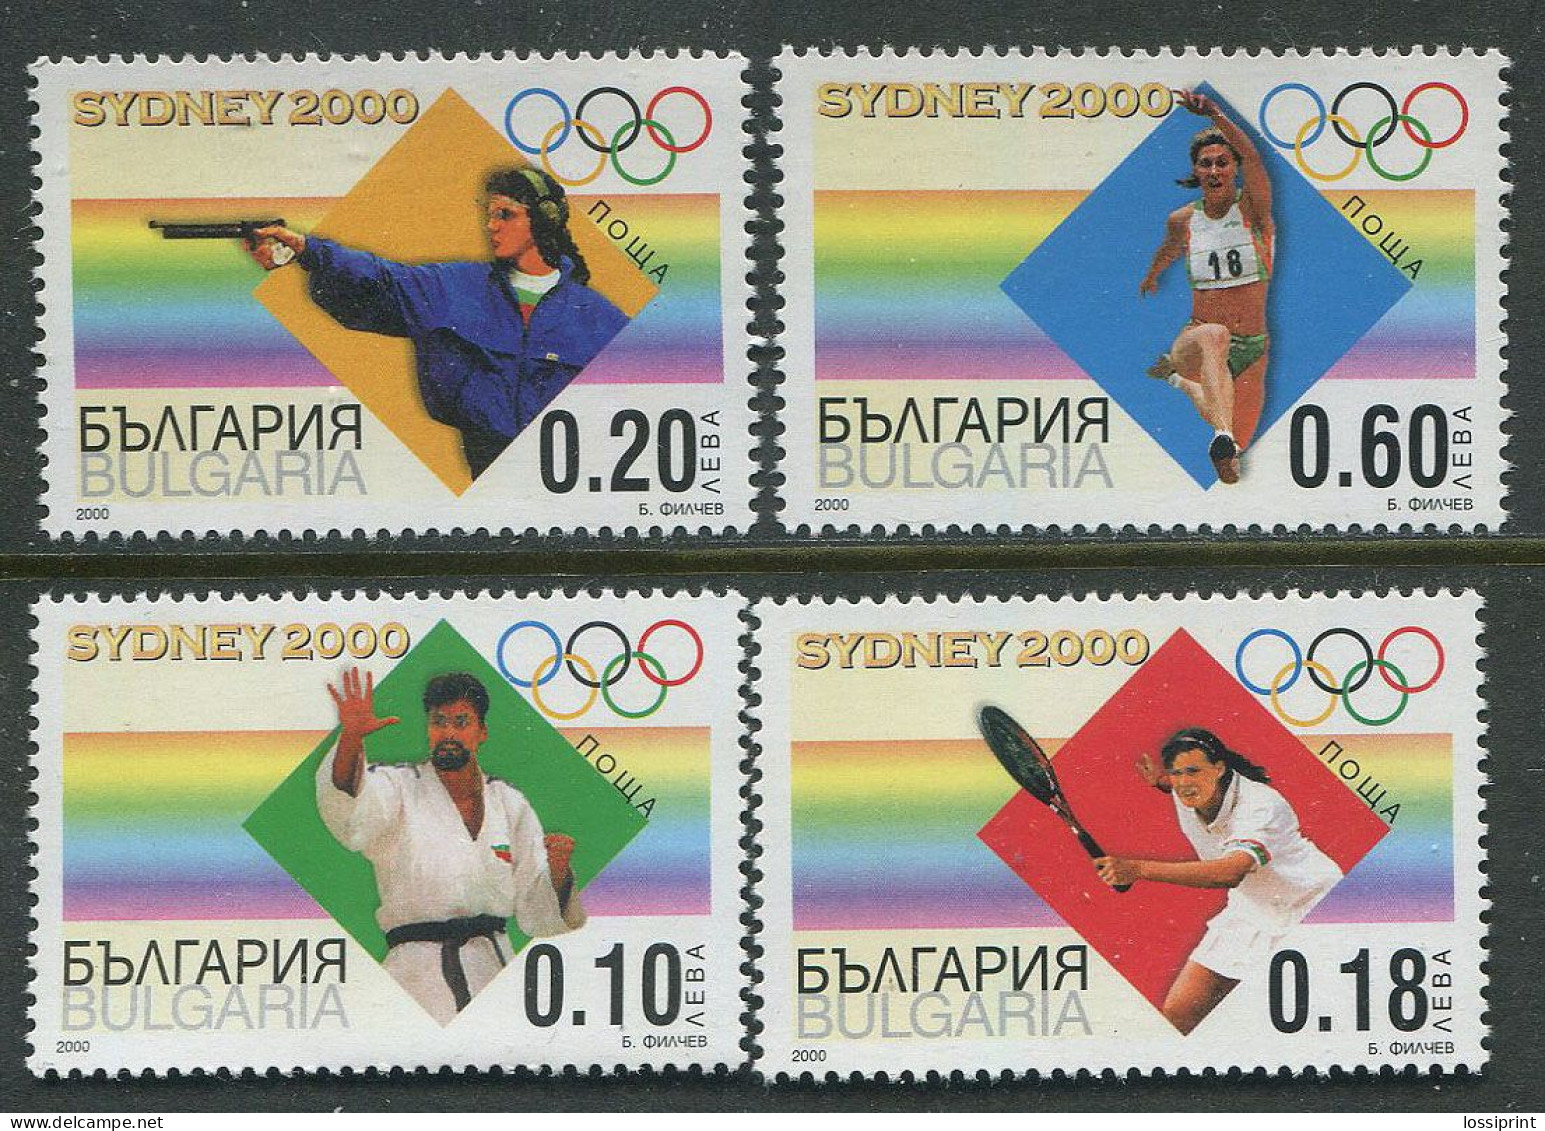 Bulgaria:Unused Stamps Serie Sydney Olympic Games 2000, MNH - Sommer 2000: Sydney